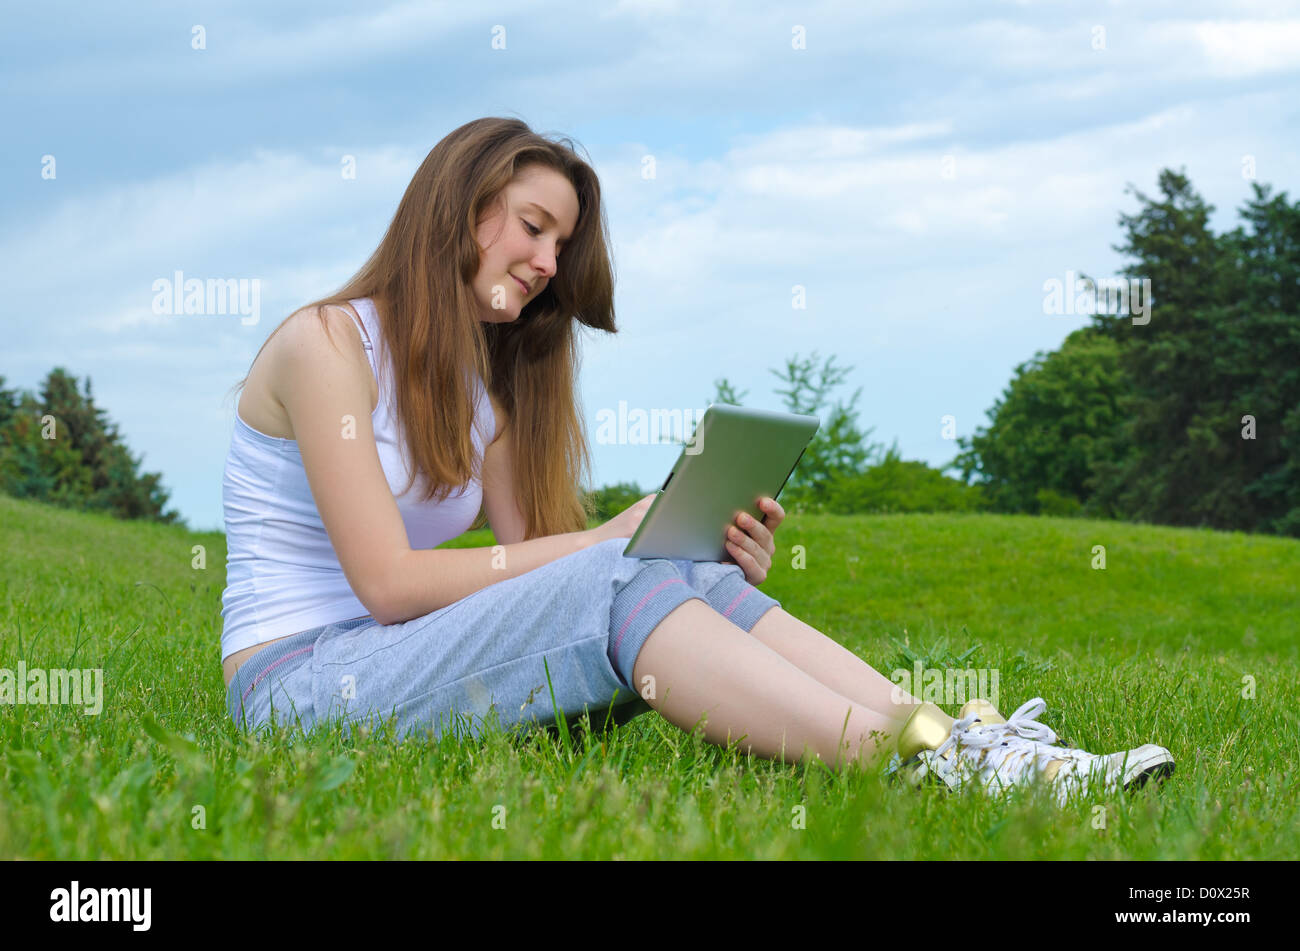 Smiling woman sitting on grass in a lush green park using a touchscreen tablet Stock Photo